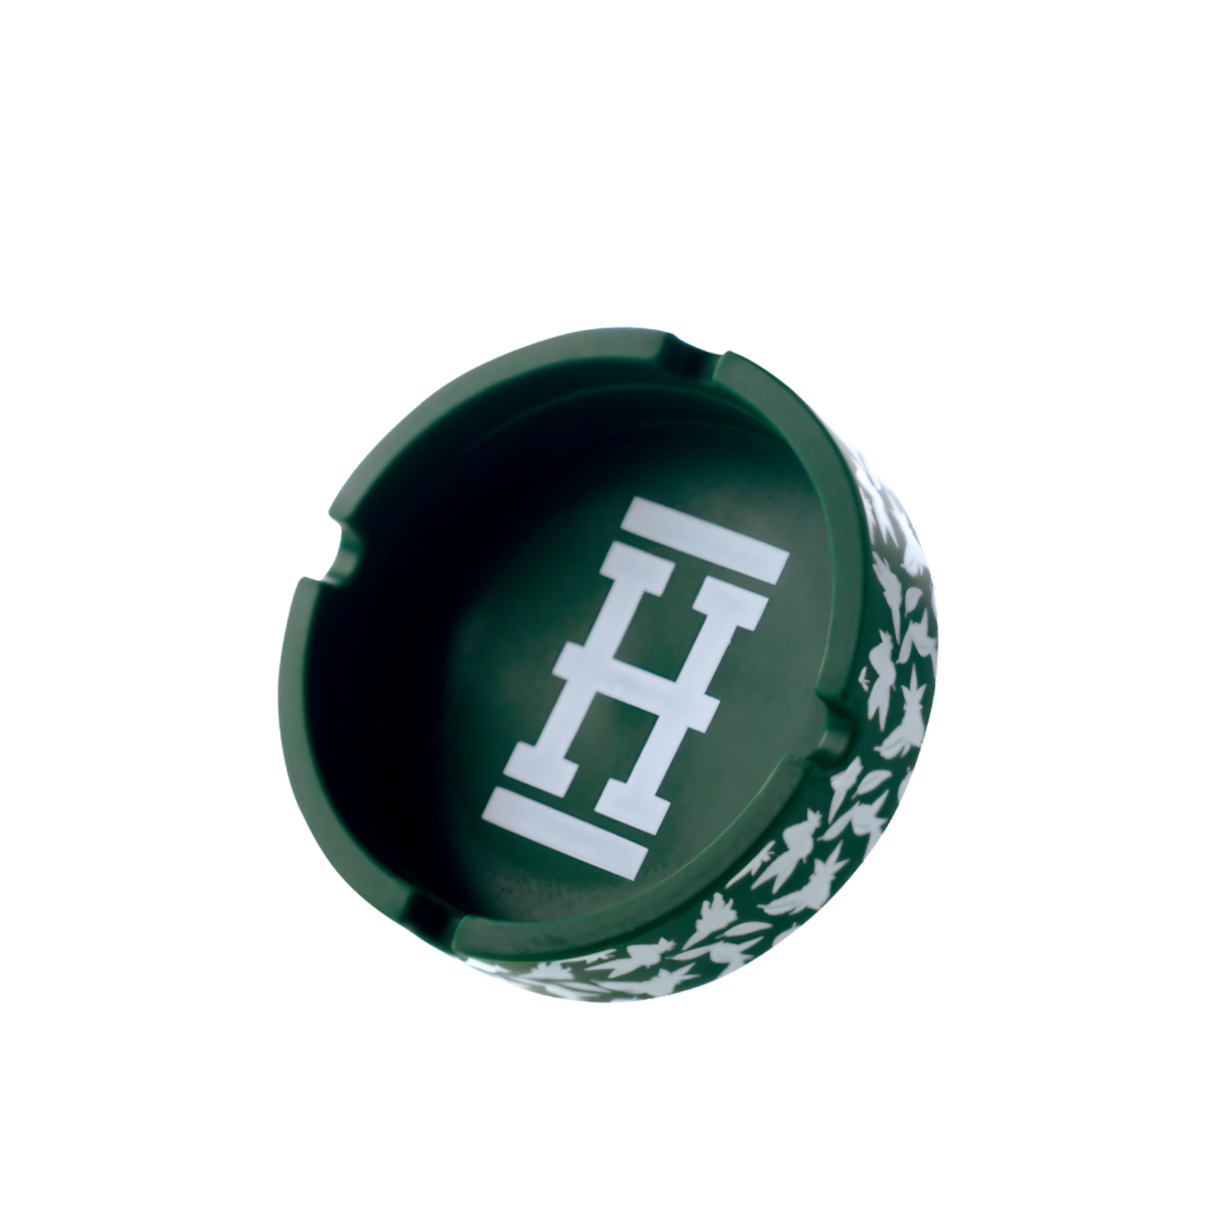 Hemper Asher "Cannaflage" Silicone Ashtray in Green/White - Top View with Notches